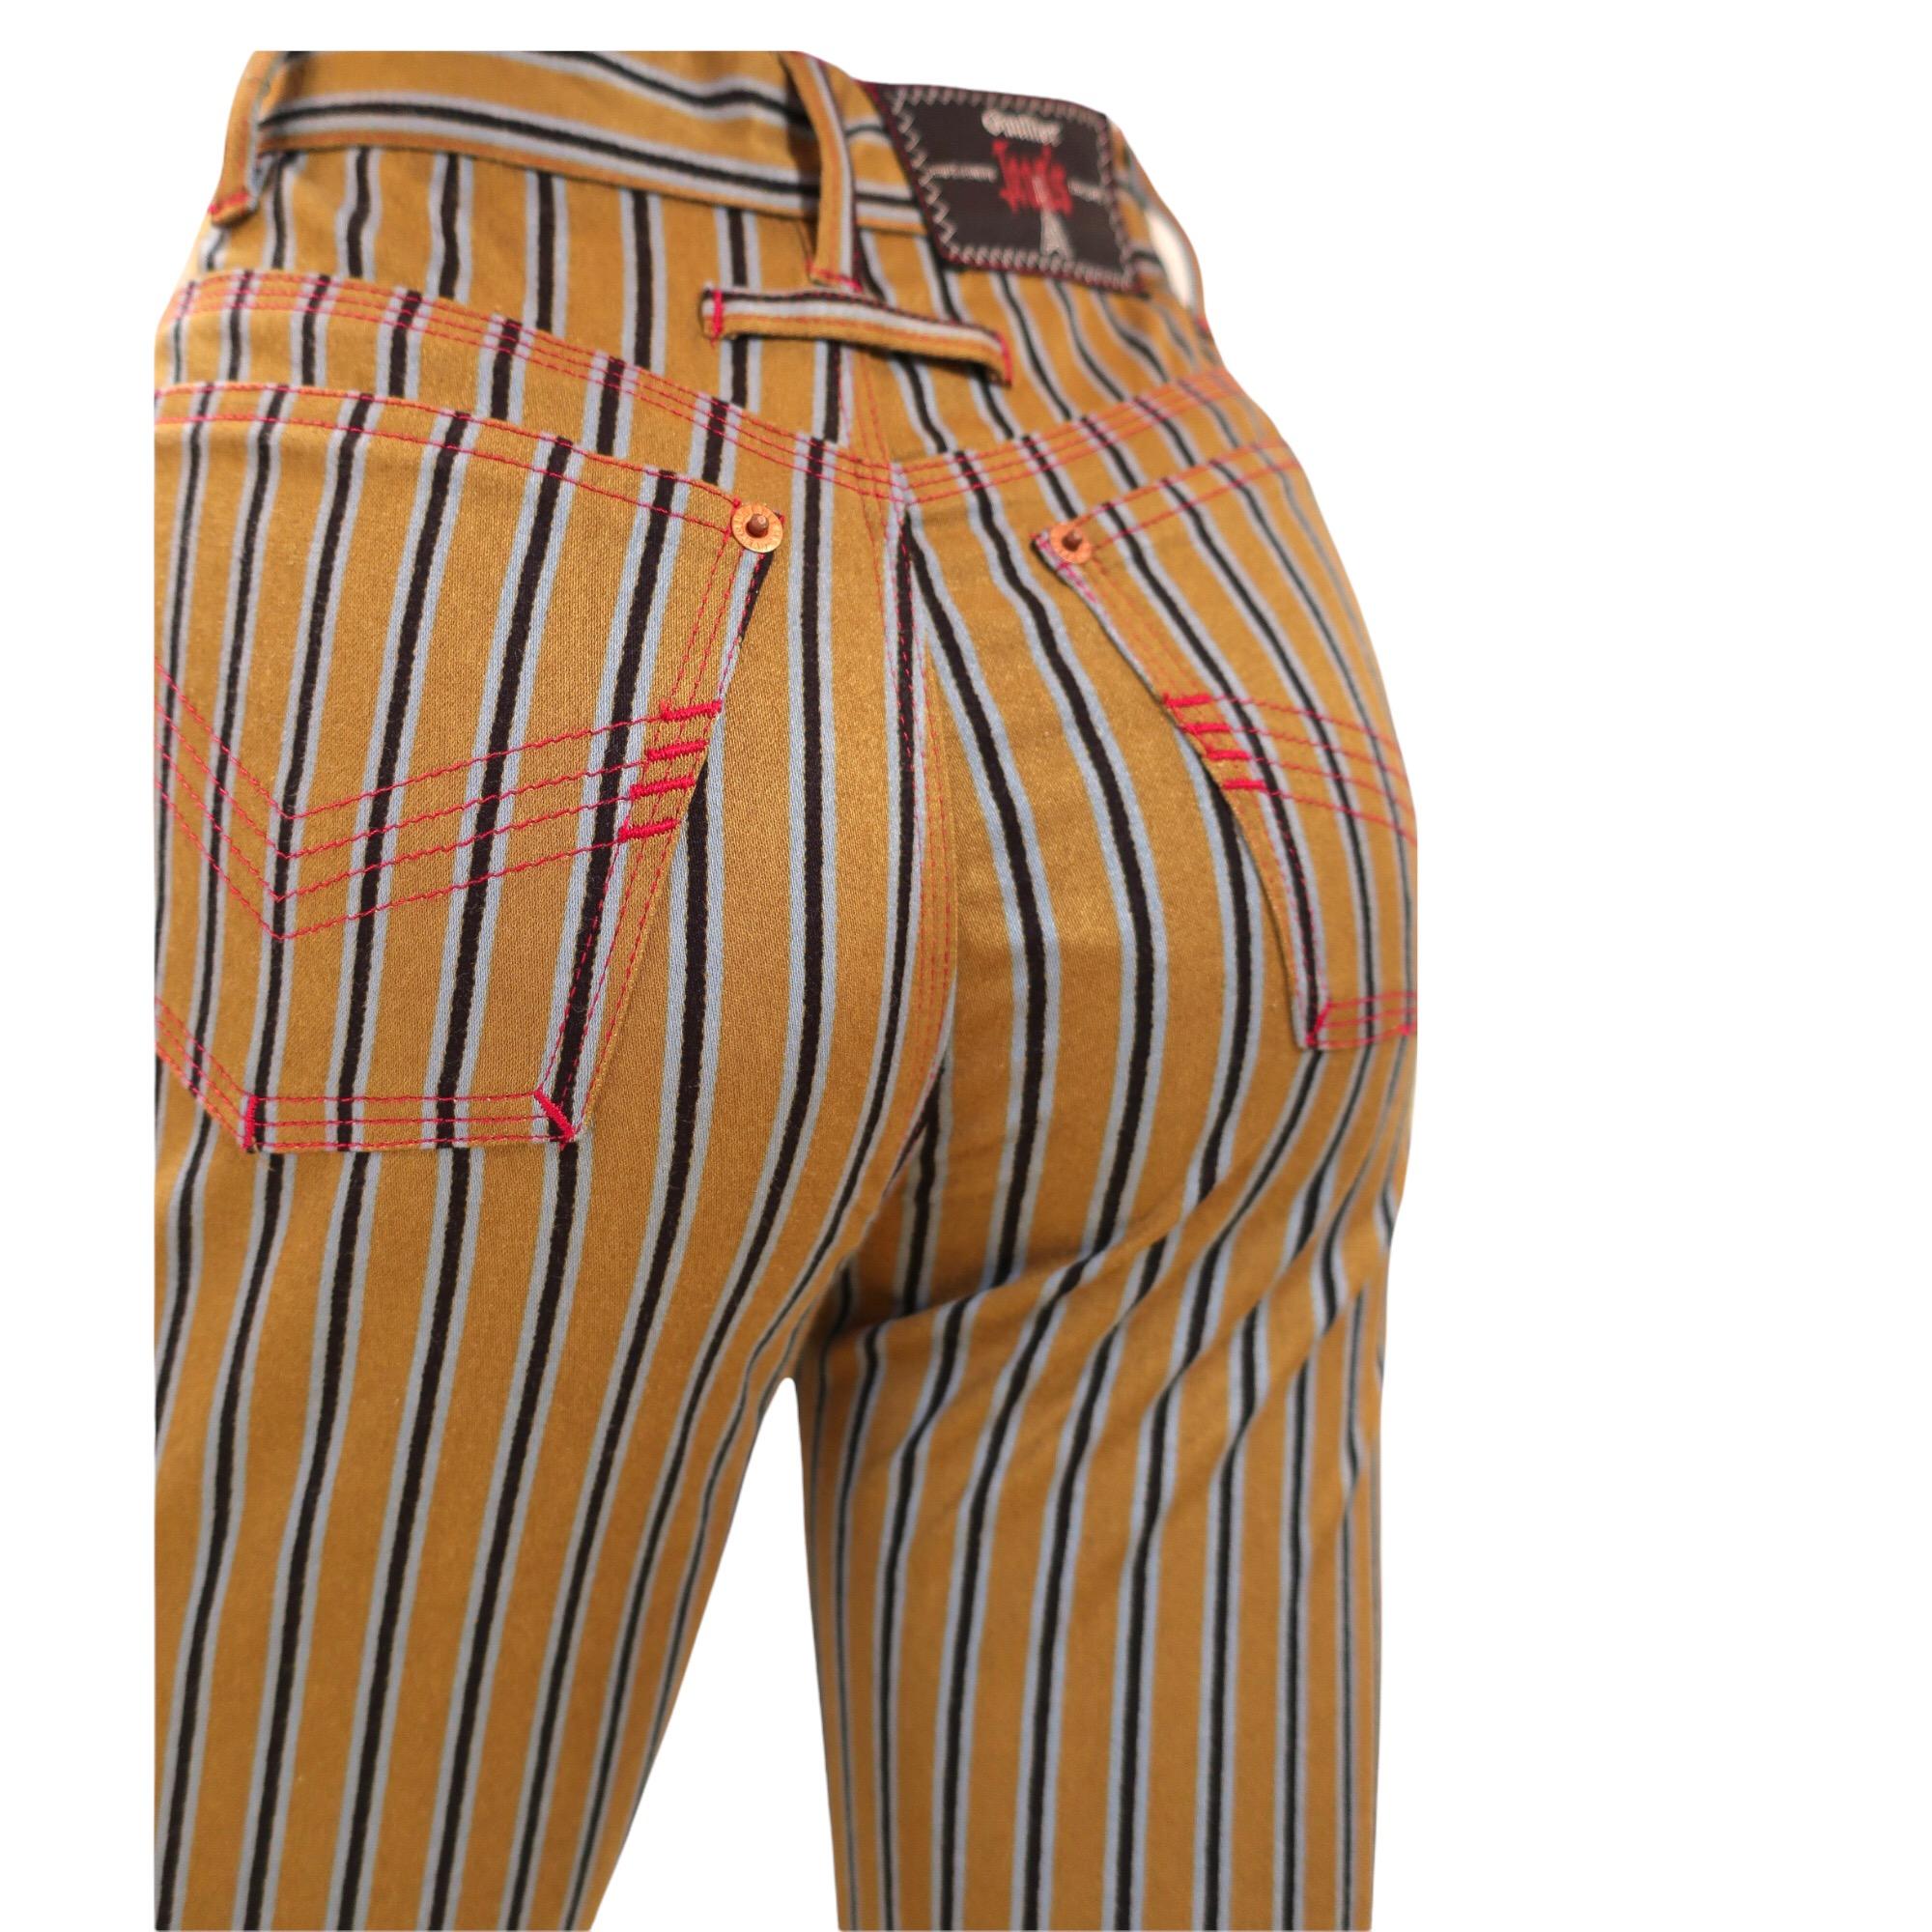 Jean Paul Gaultier Striped Jeans In New Condition For Sale In Laguna Beach, CA